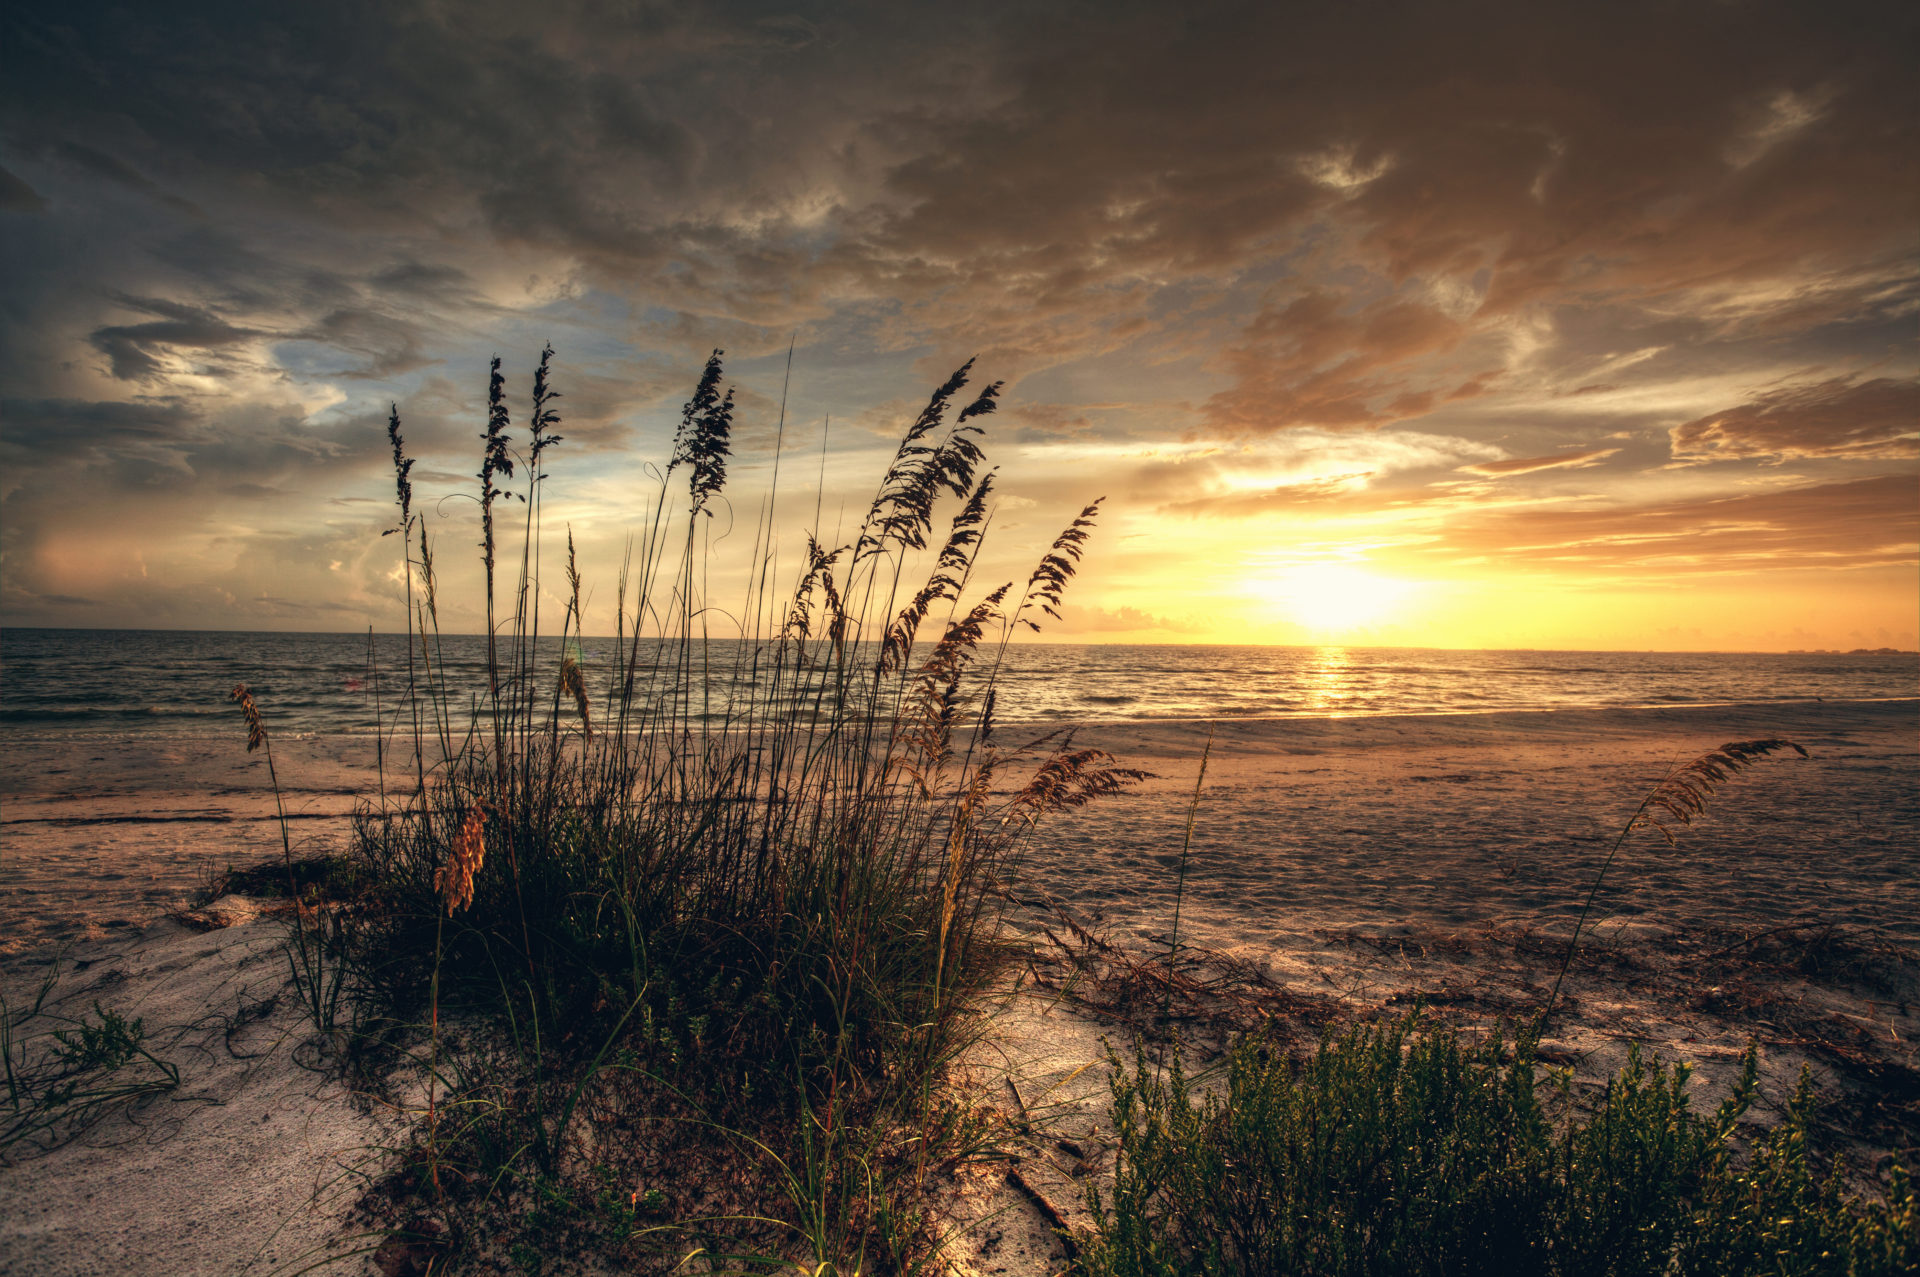 STAjets Travel Guide | Top 5 Beaches To Visit in Florida